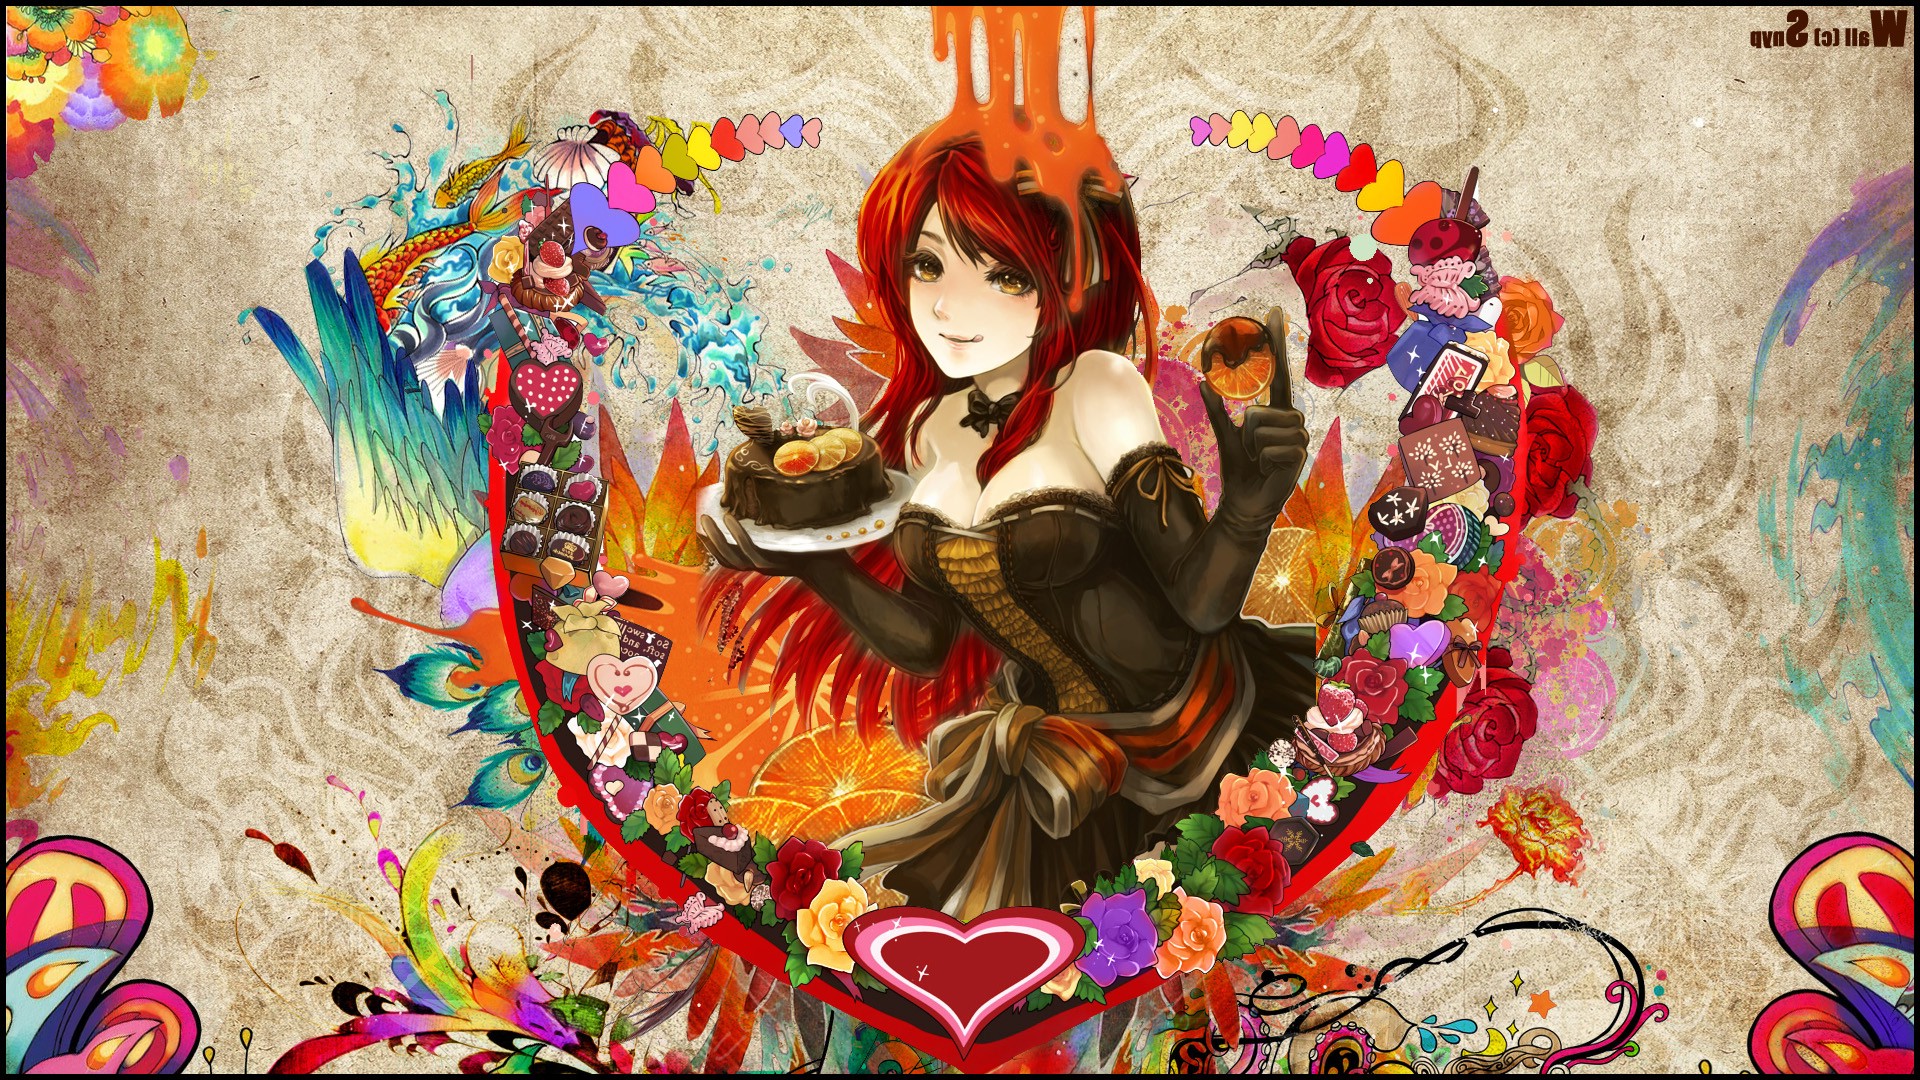 rose, Orange (fruit), Women, Anime, Cakes, Hearts, Colorful, Flowers, Original Characters, Redhead, Anime Girls, Snyp Wallpaper